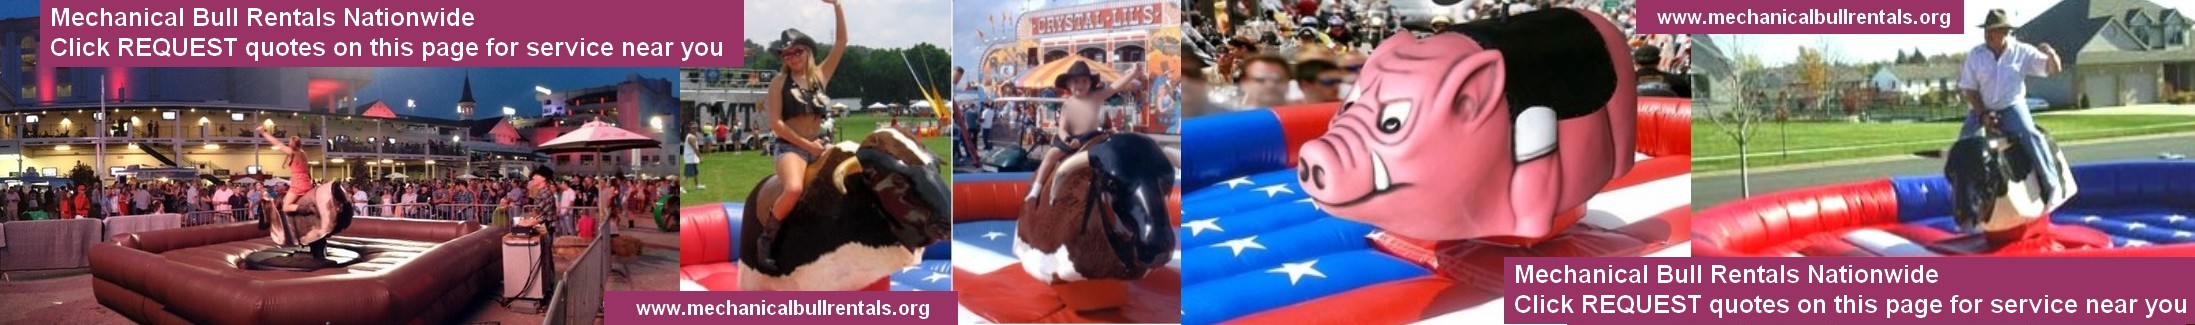 Mechanical Bull Rentals Green Bay Wisconsin WI and near you. Free referrals to local mechanical bull companies LOGO